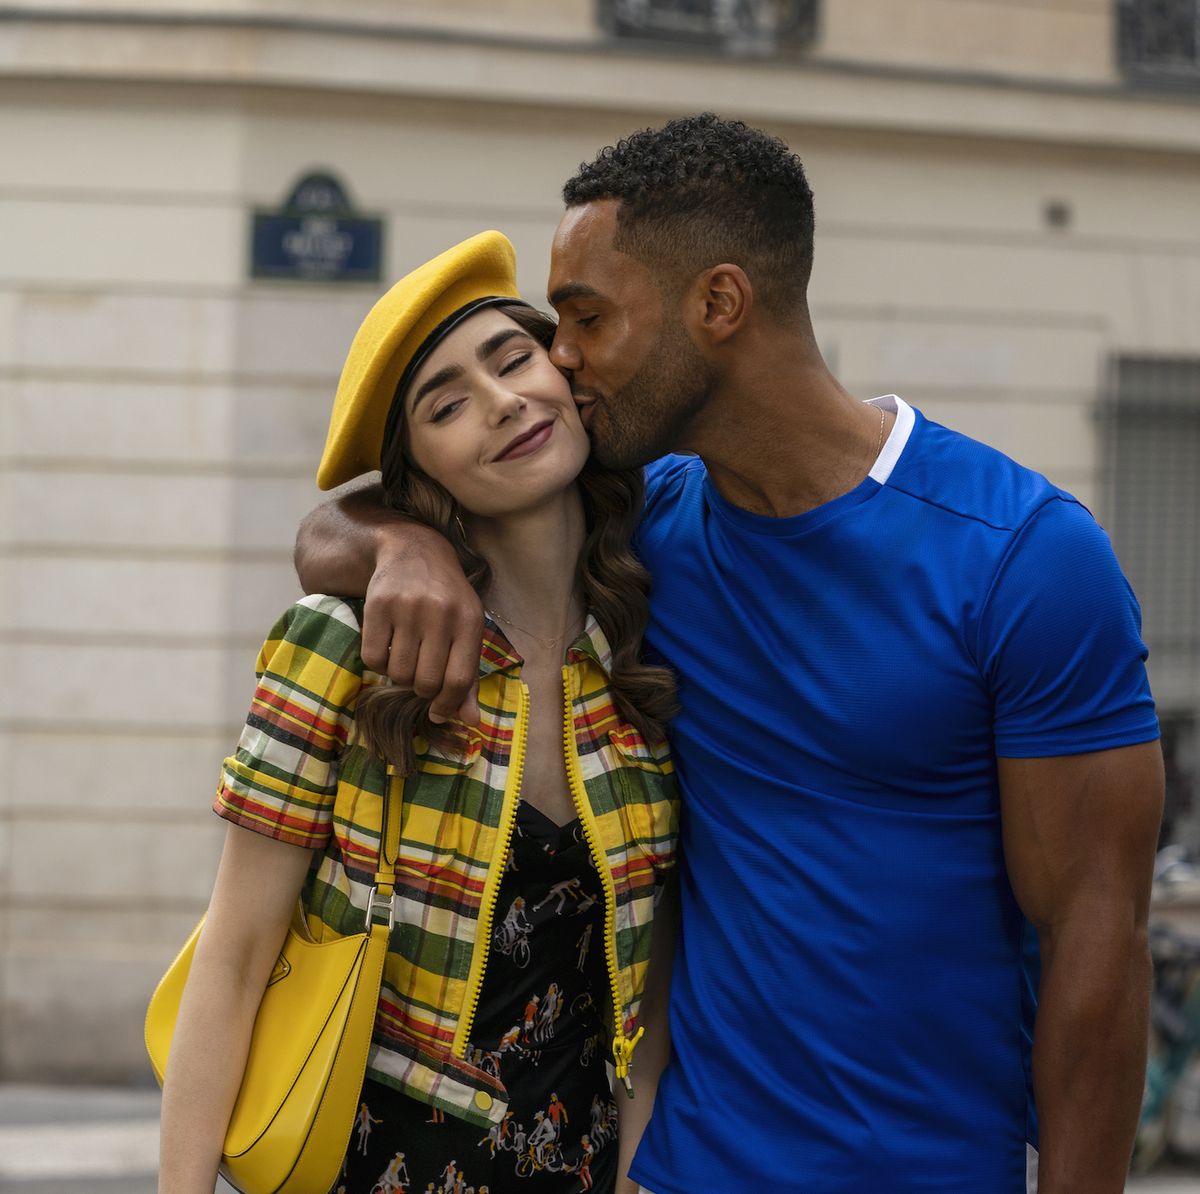 Emily in Paris season 4 potential release date, cast and more